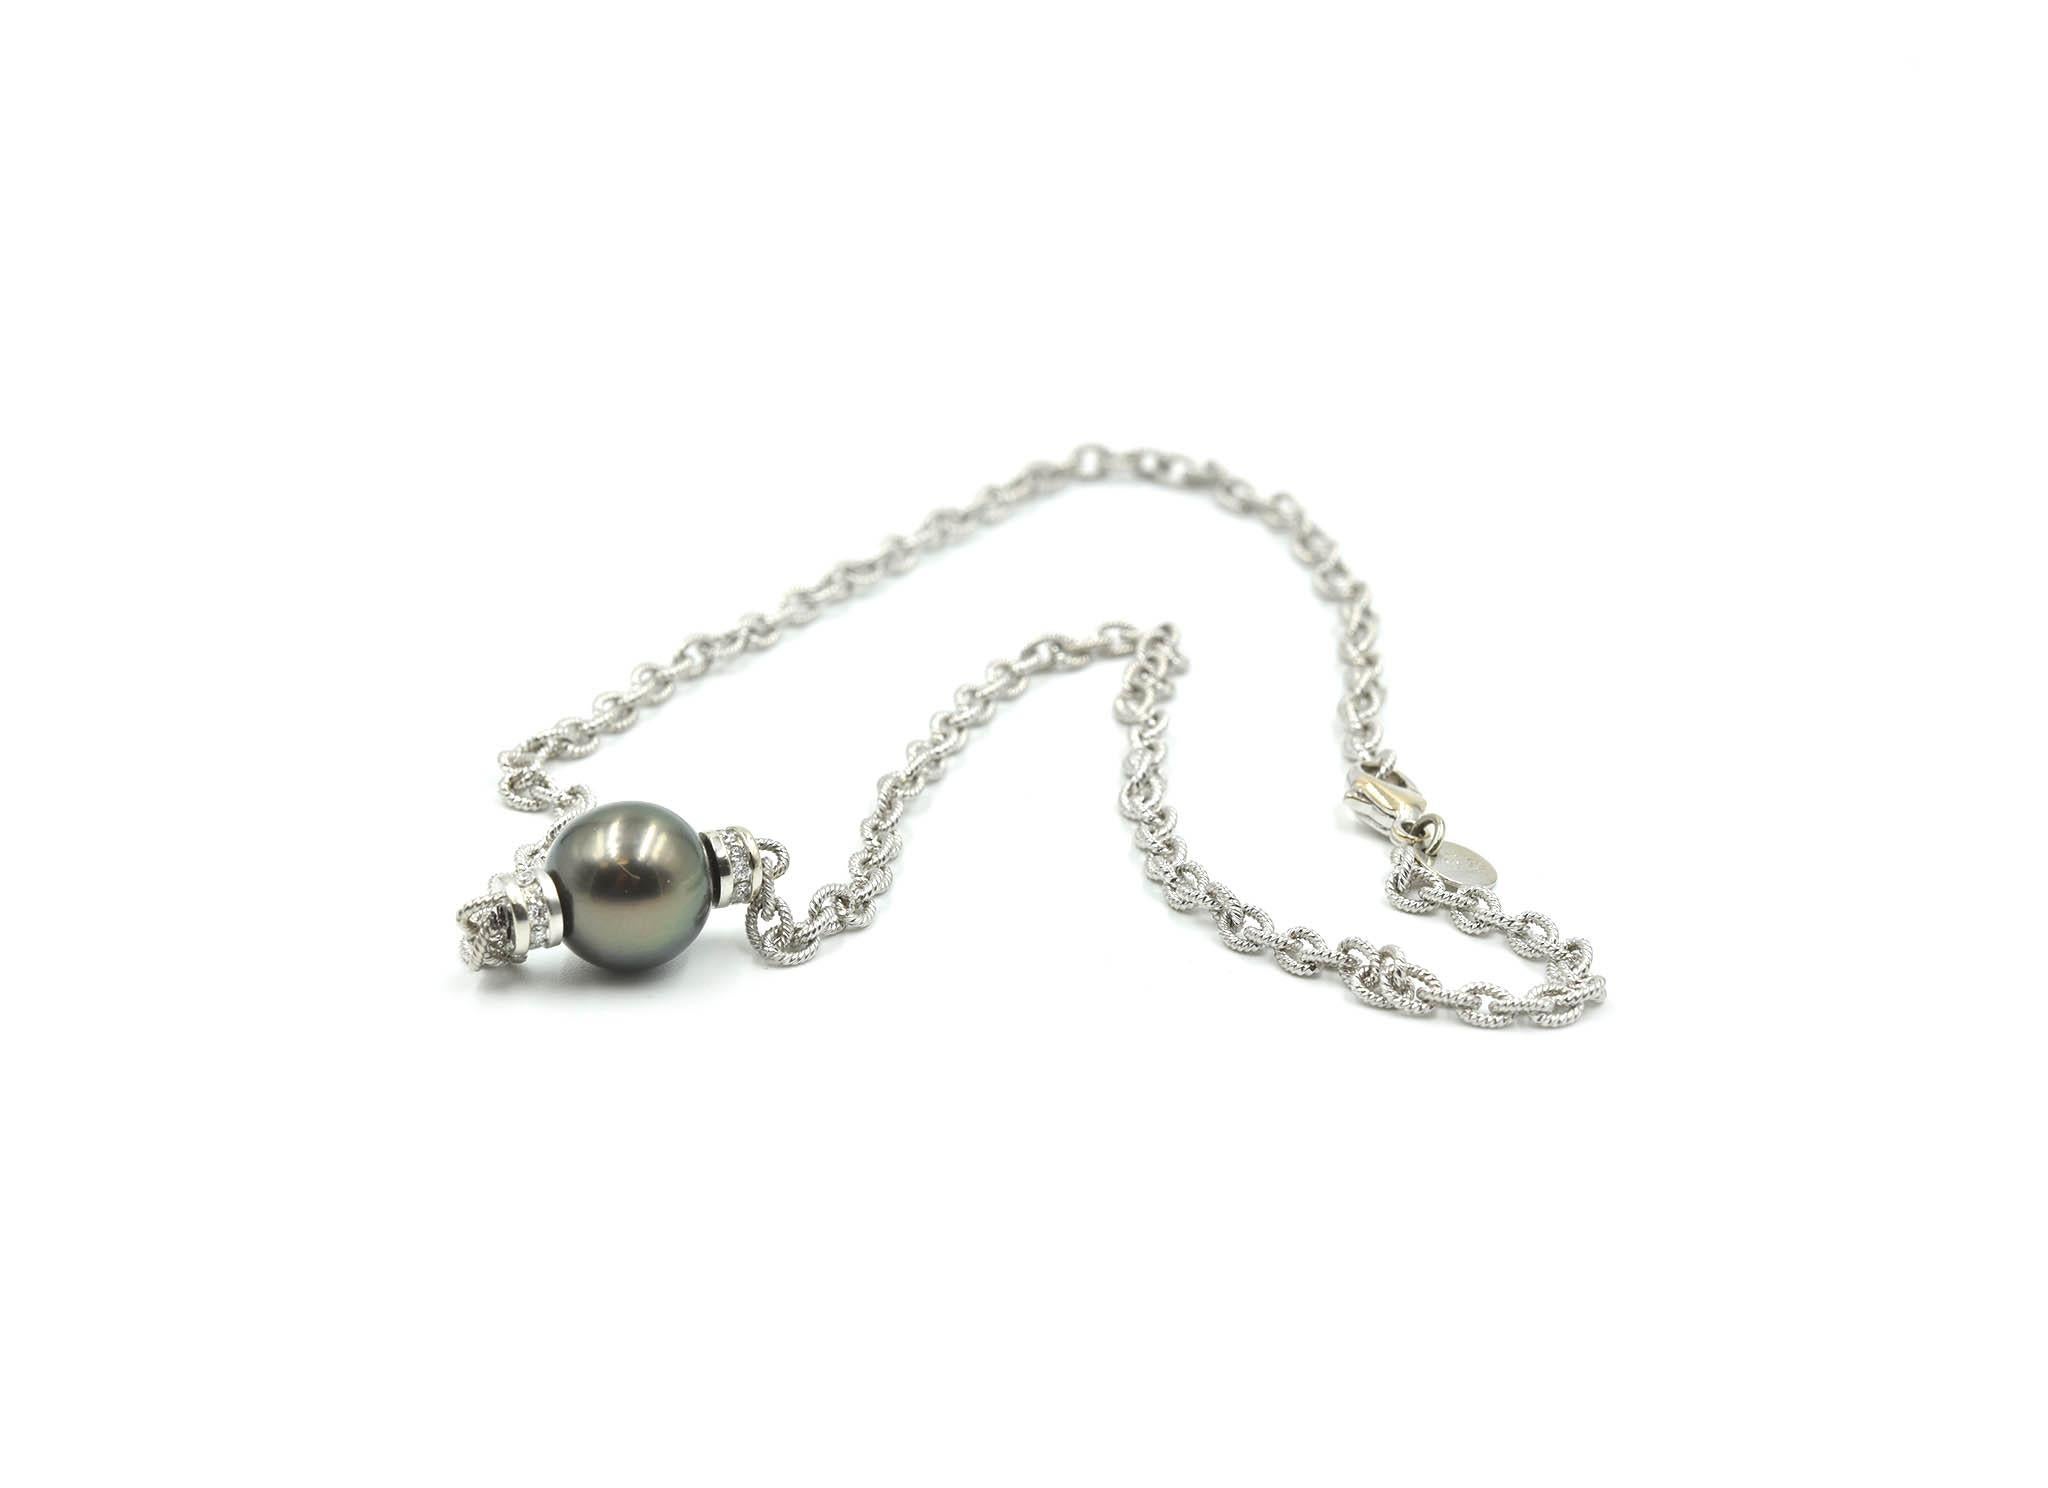 This modern necklace is made in 18k white gold. There is an 11mm Tahitian pearl at the center, which is accented by round diamonds (0.18cttw). The necklace measures 17 inches in length, and it weighs 17.86 grams. 